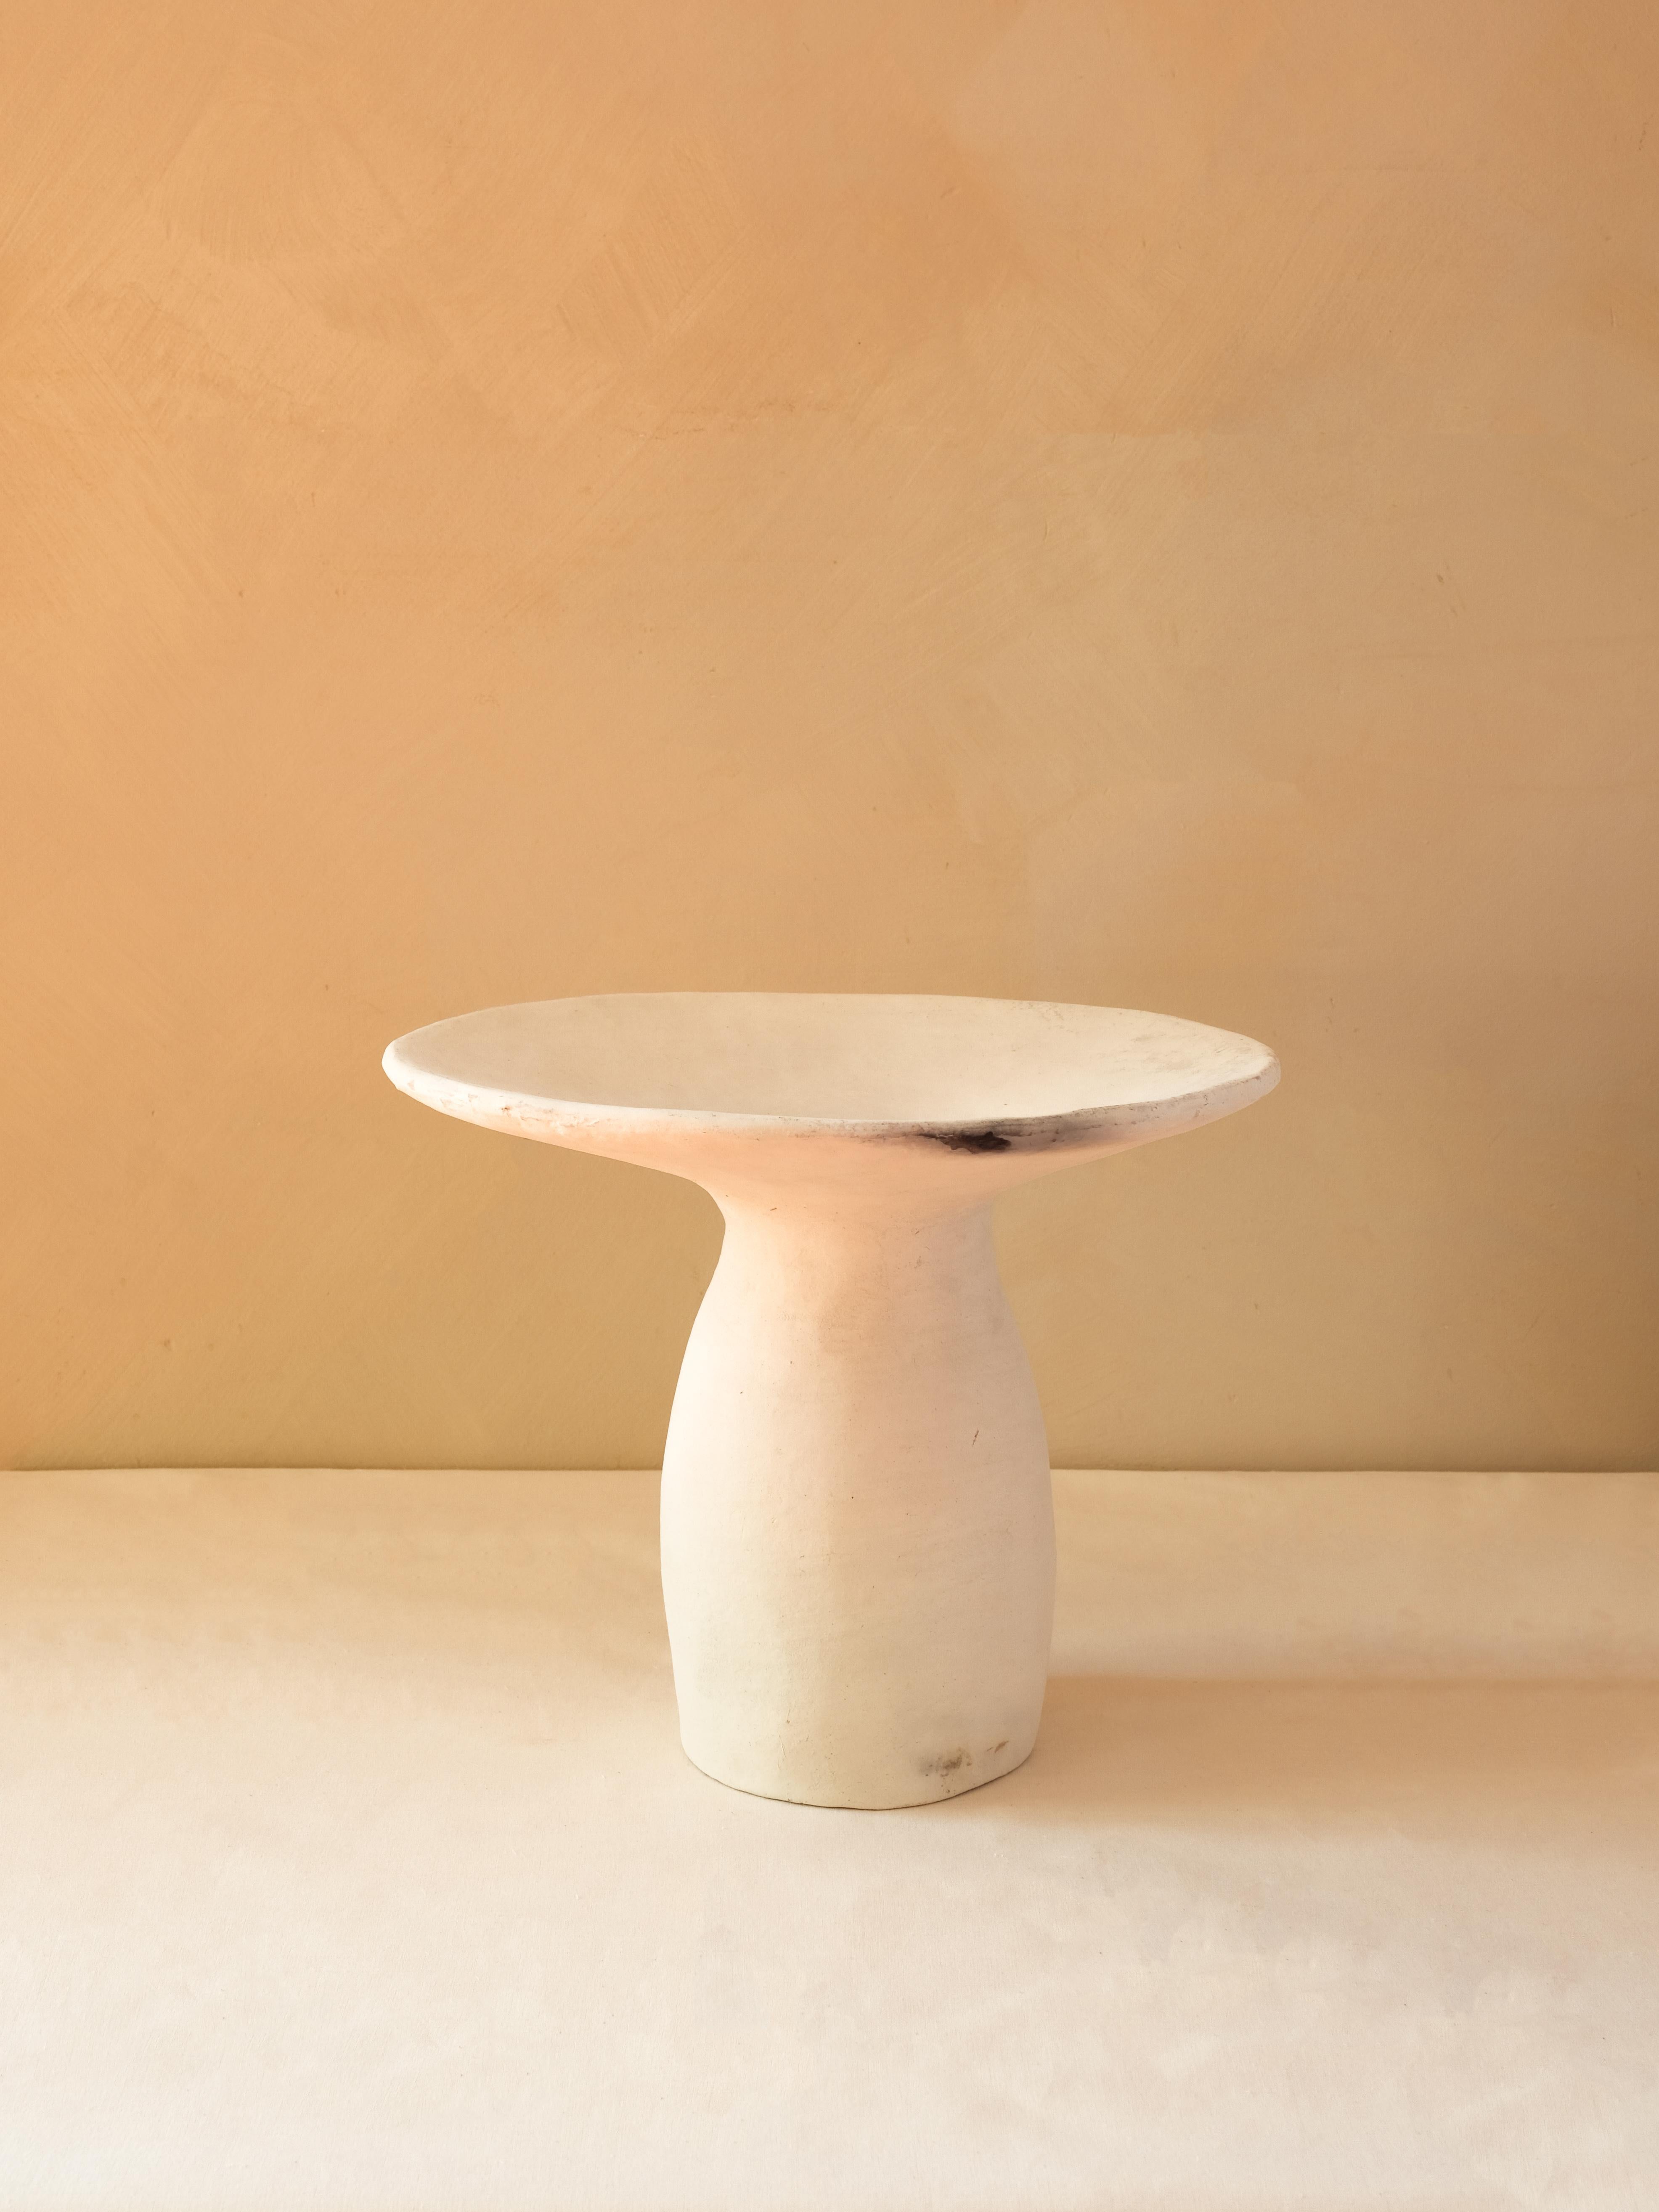 White Side Tables Made of local Clay, natural pigments, Handcrafted 3